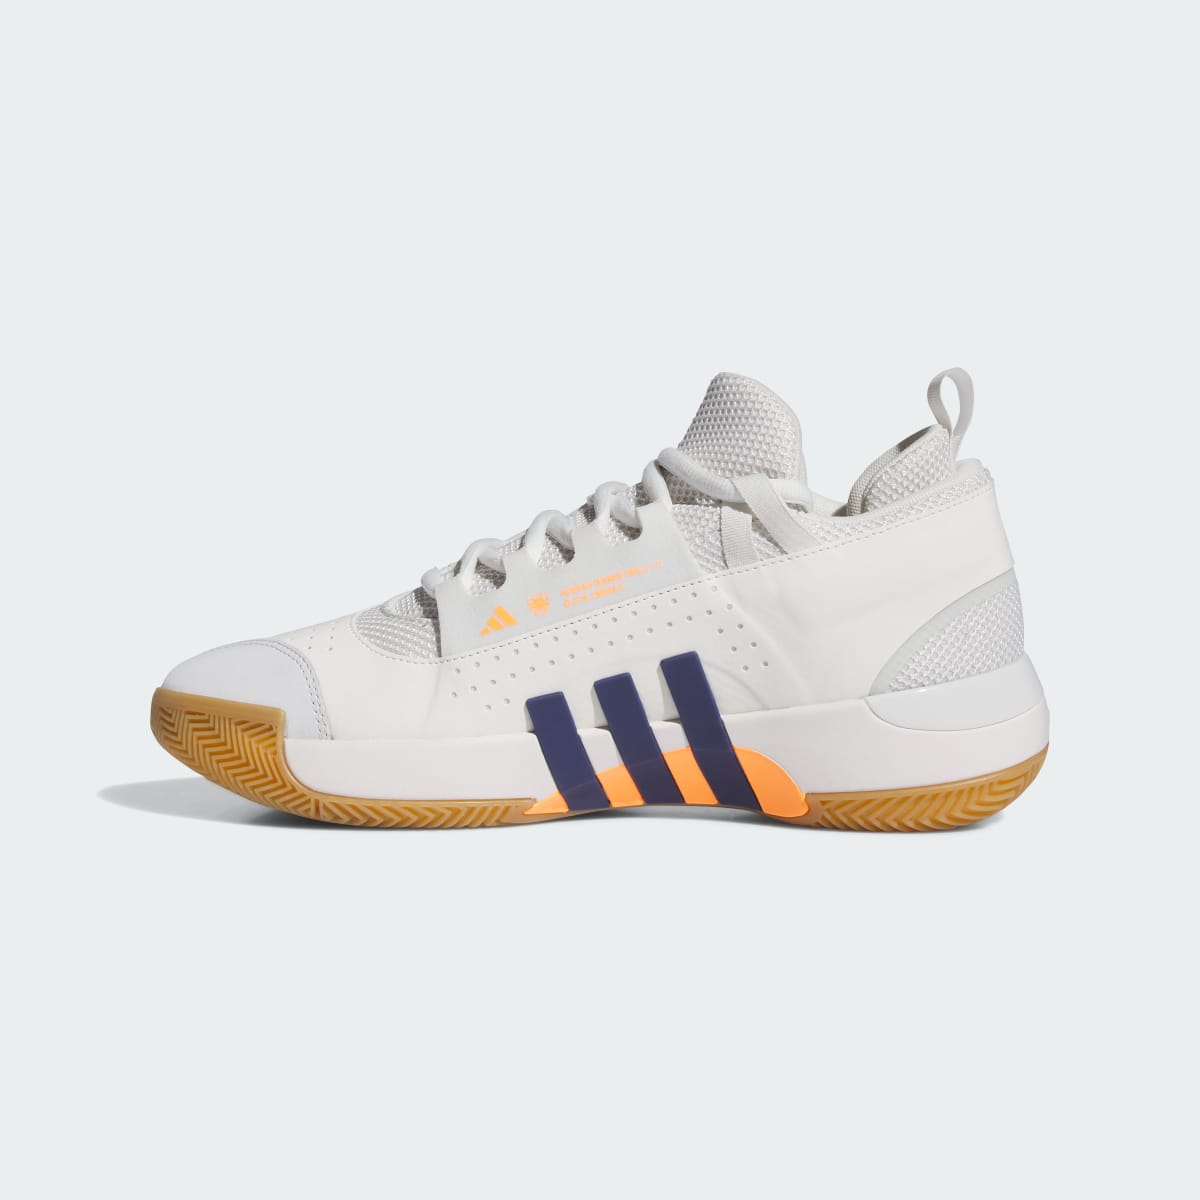 Adidas D.O.N. Issue 5 Shoes. 7